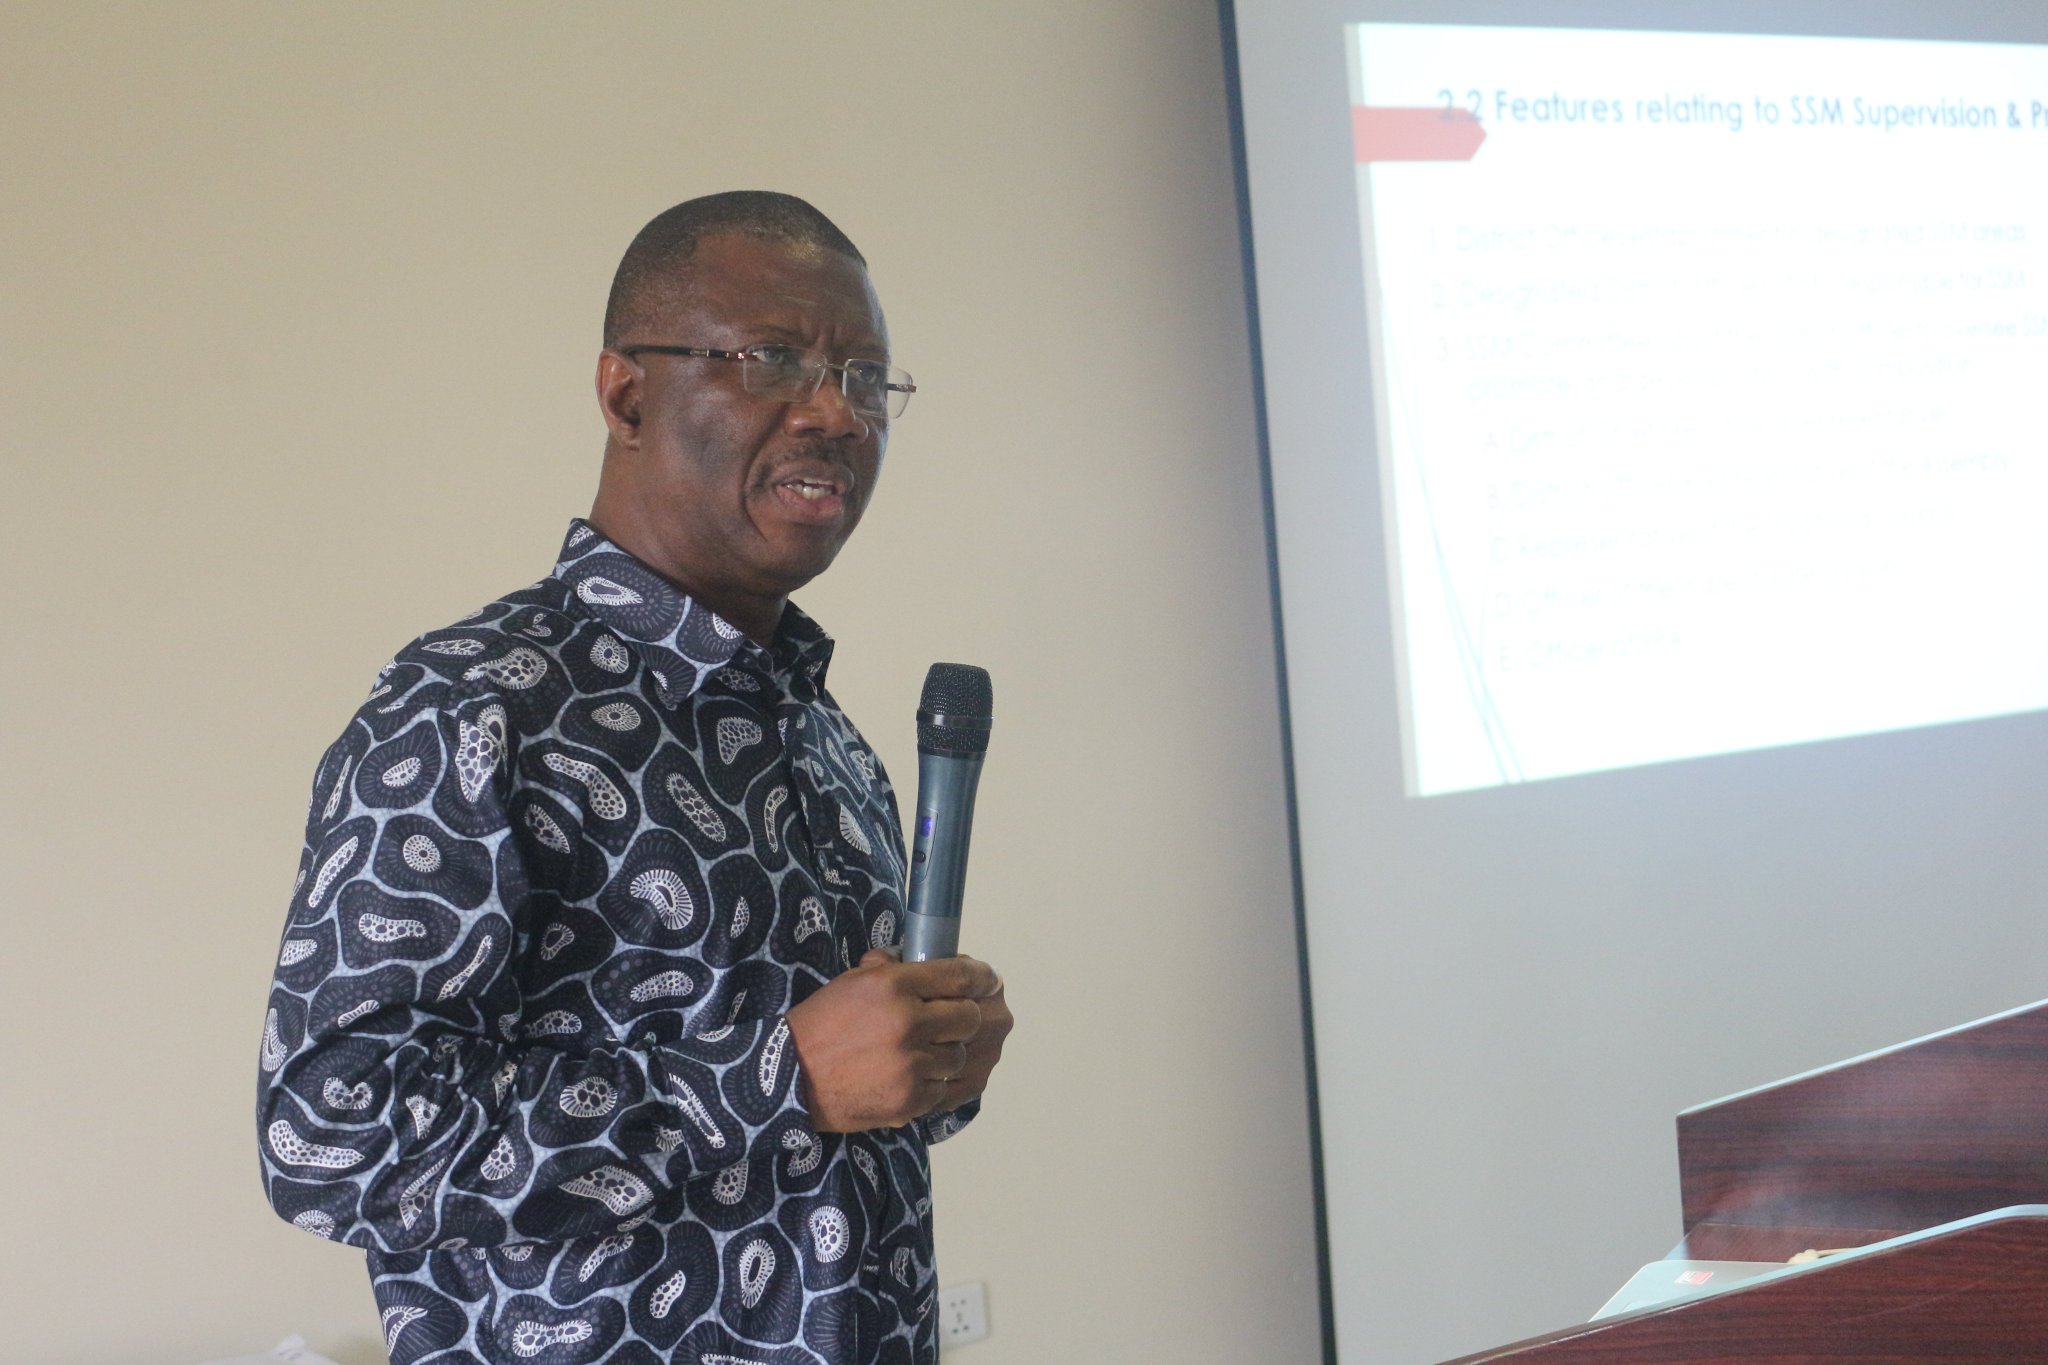 "ASSM is reserved for Ghanaians"
Yaw Osei, Green Advocacy Ghana shares as one of the key characteristics of ASSM sector 
@fittwittar @IIED https://t.co/wUk20KdZ9y